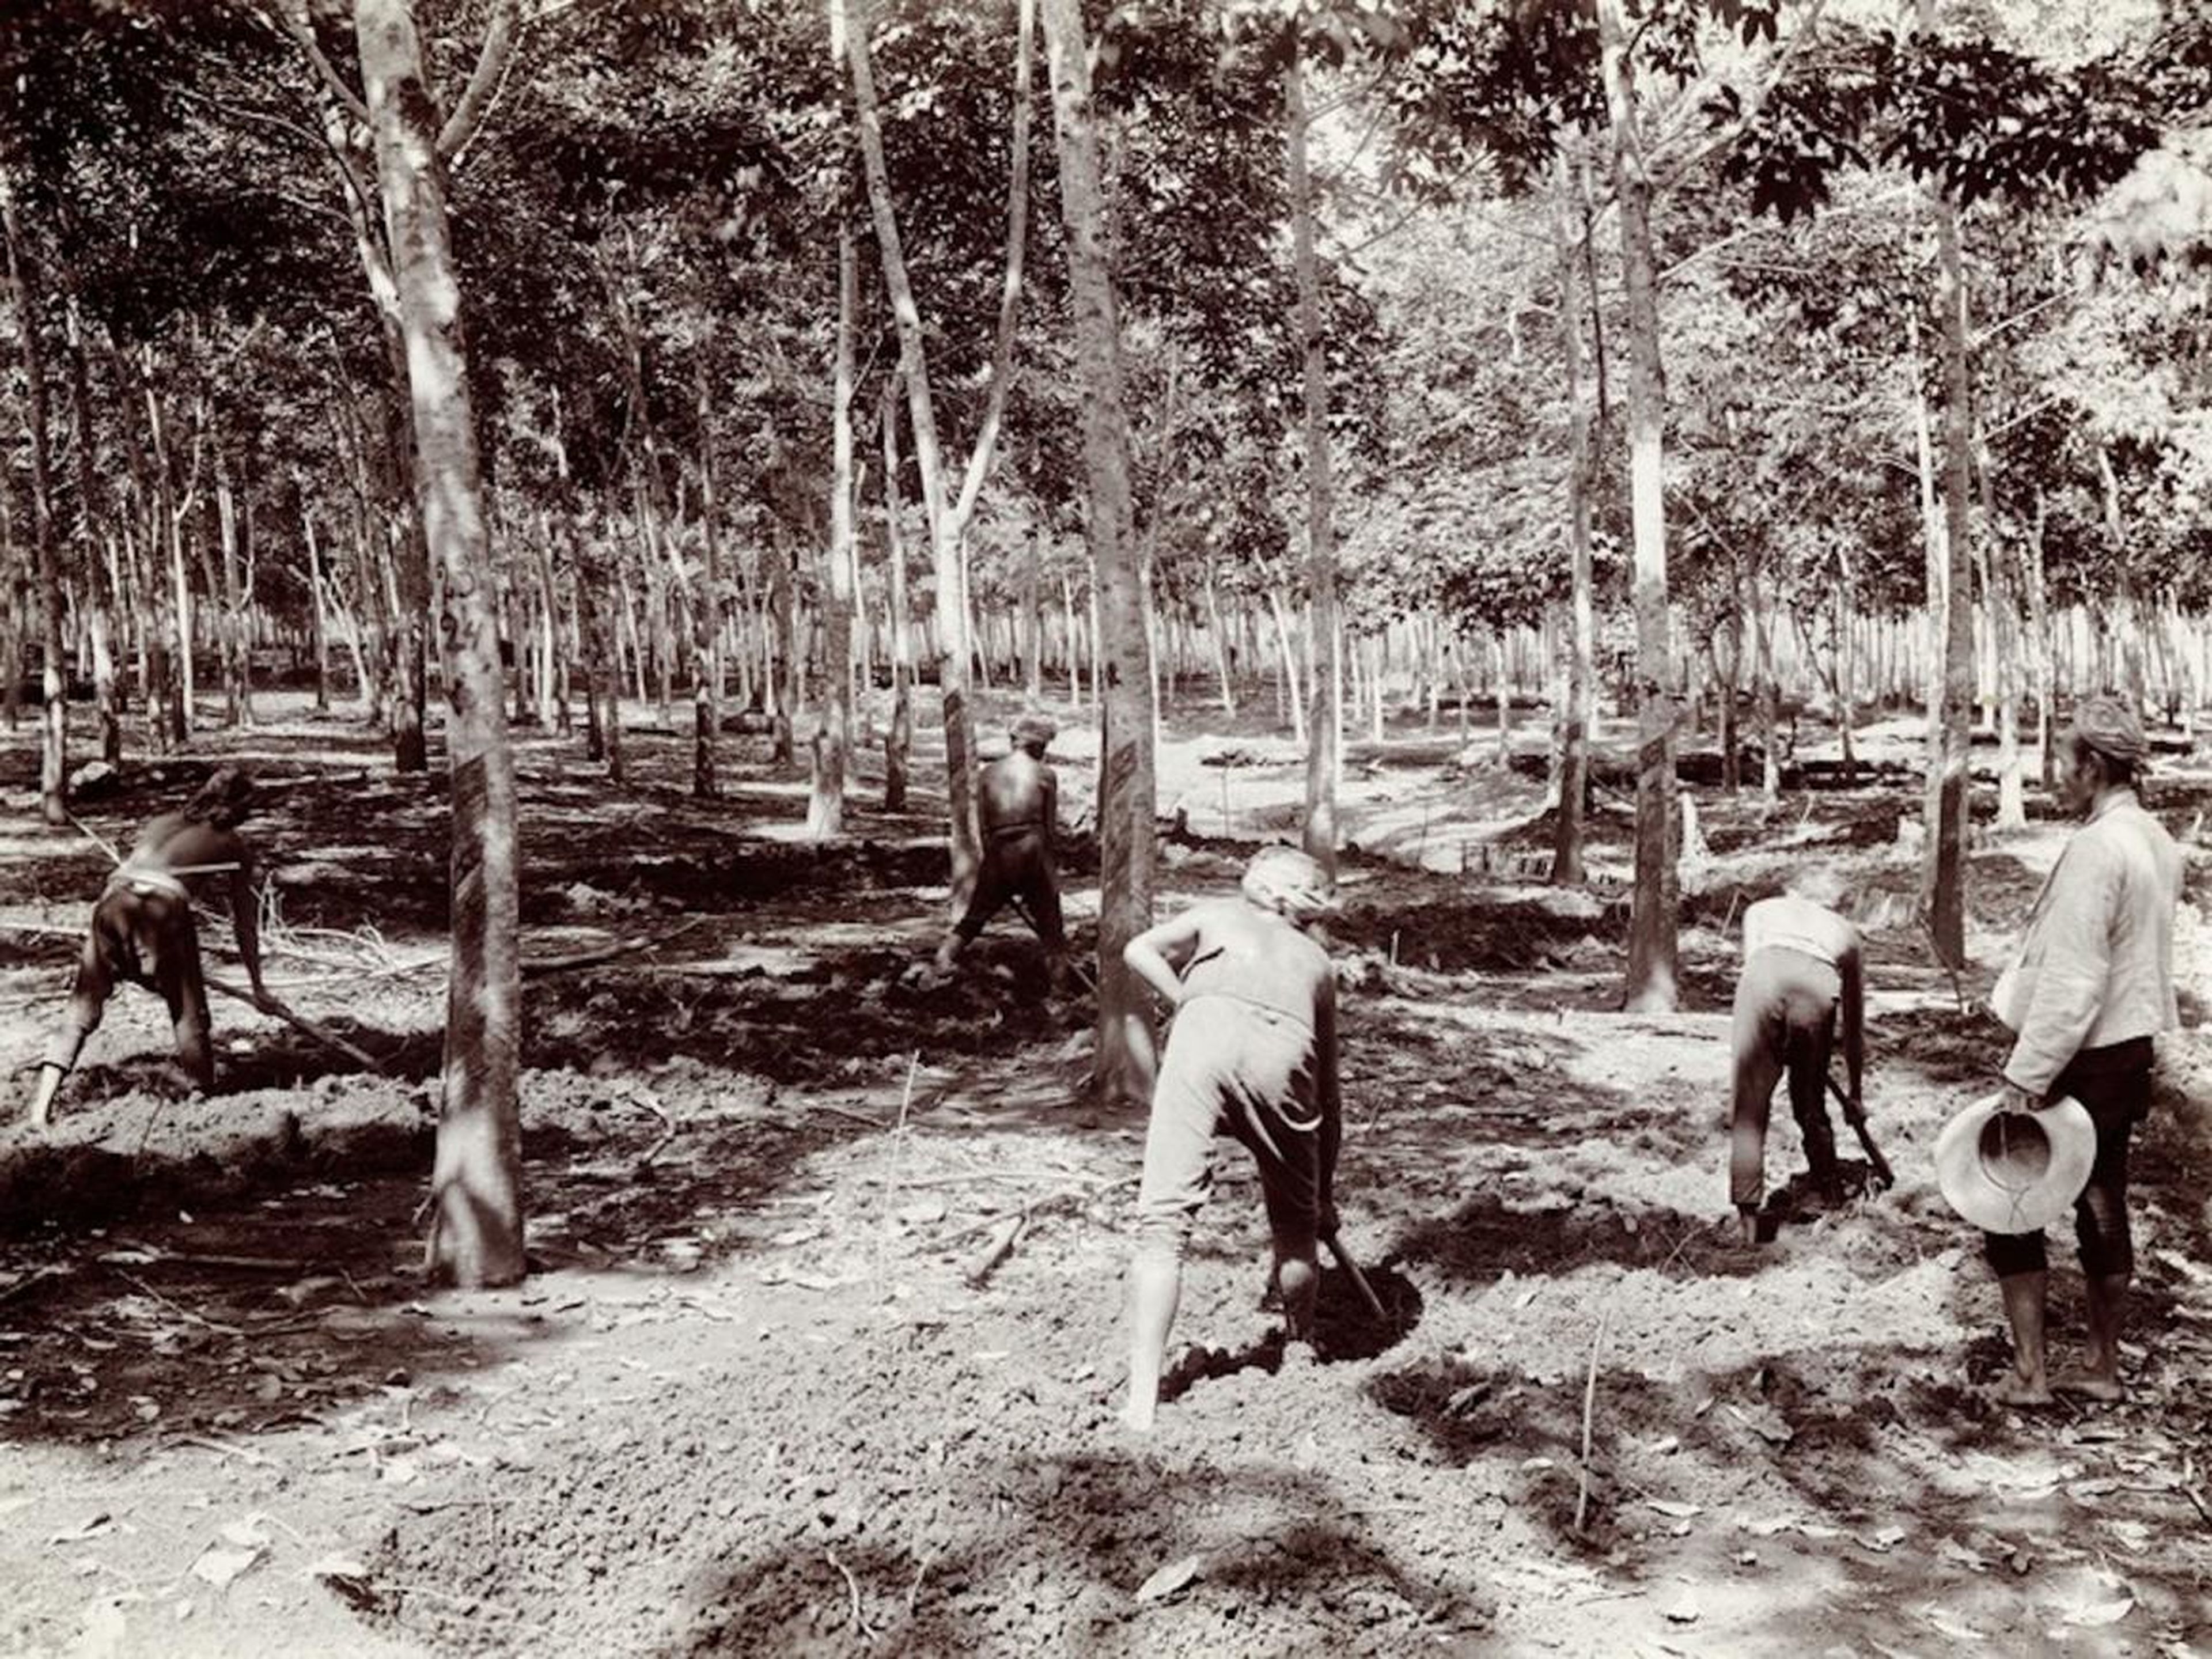 A rubber plantation in British-ruled Java, Indonesia, in 1915.